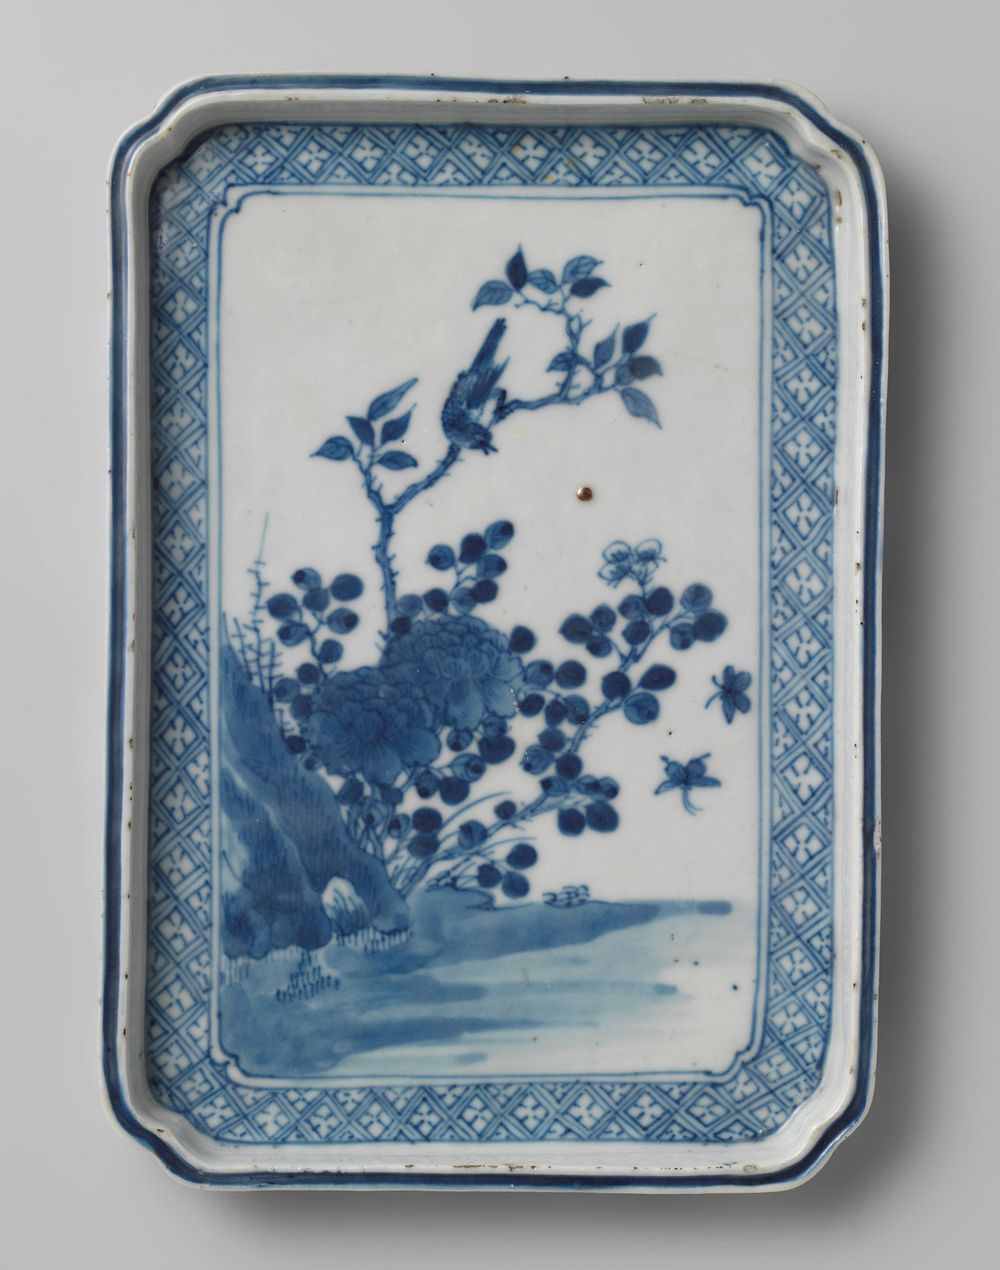 Rectangular dish with flowering plants, a bird and insects near a rock (c. 1700 - c. 1799) by anonymous